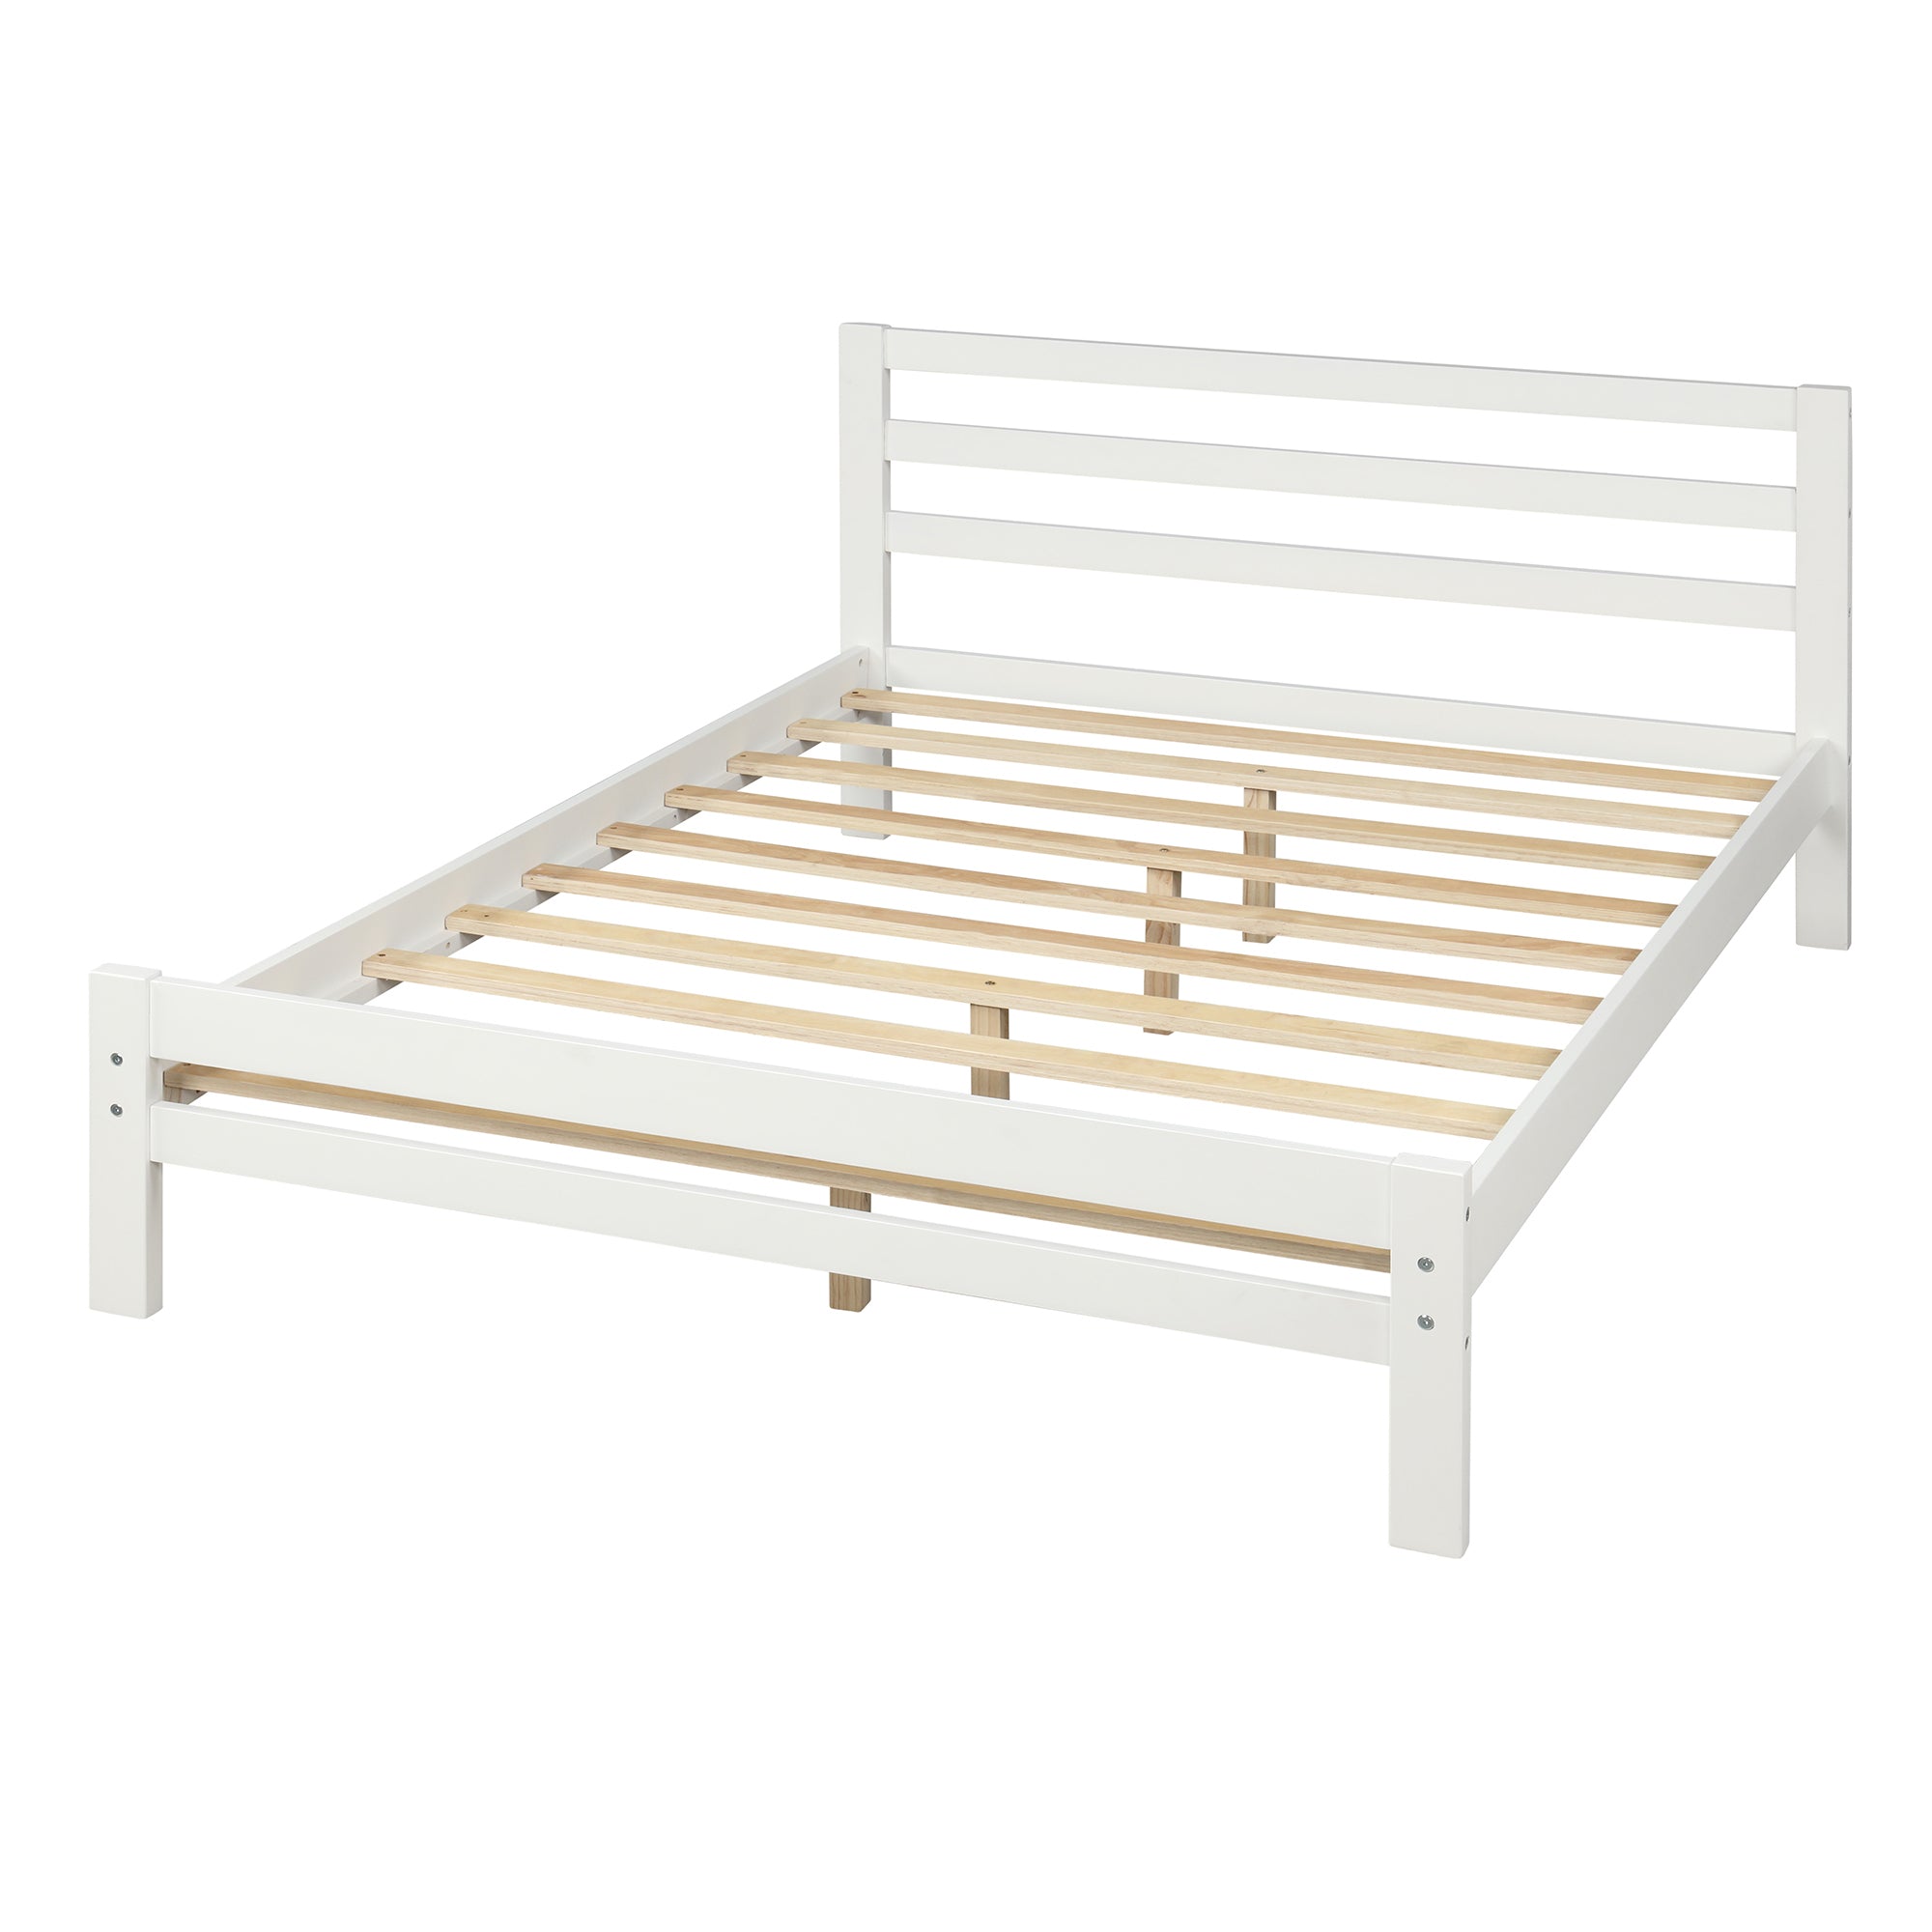 platform full bed with drawers, white